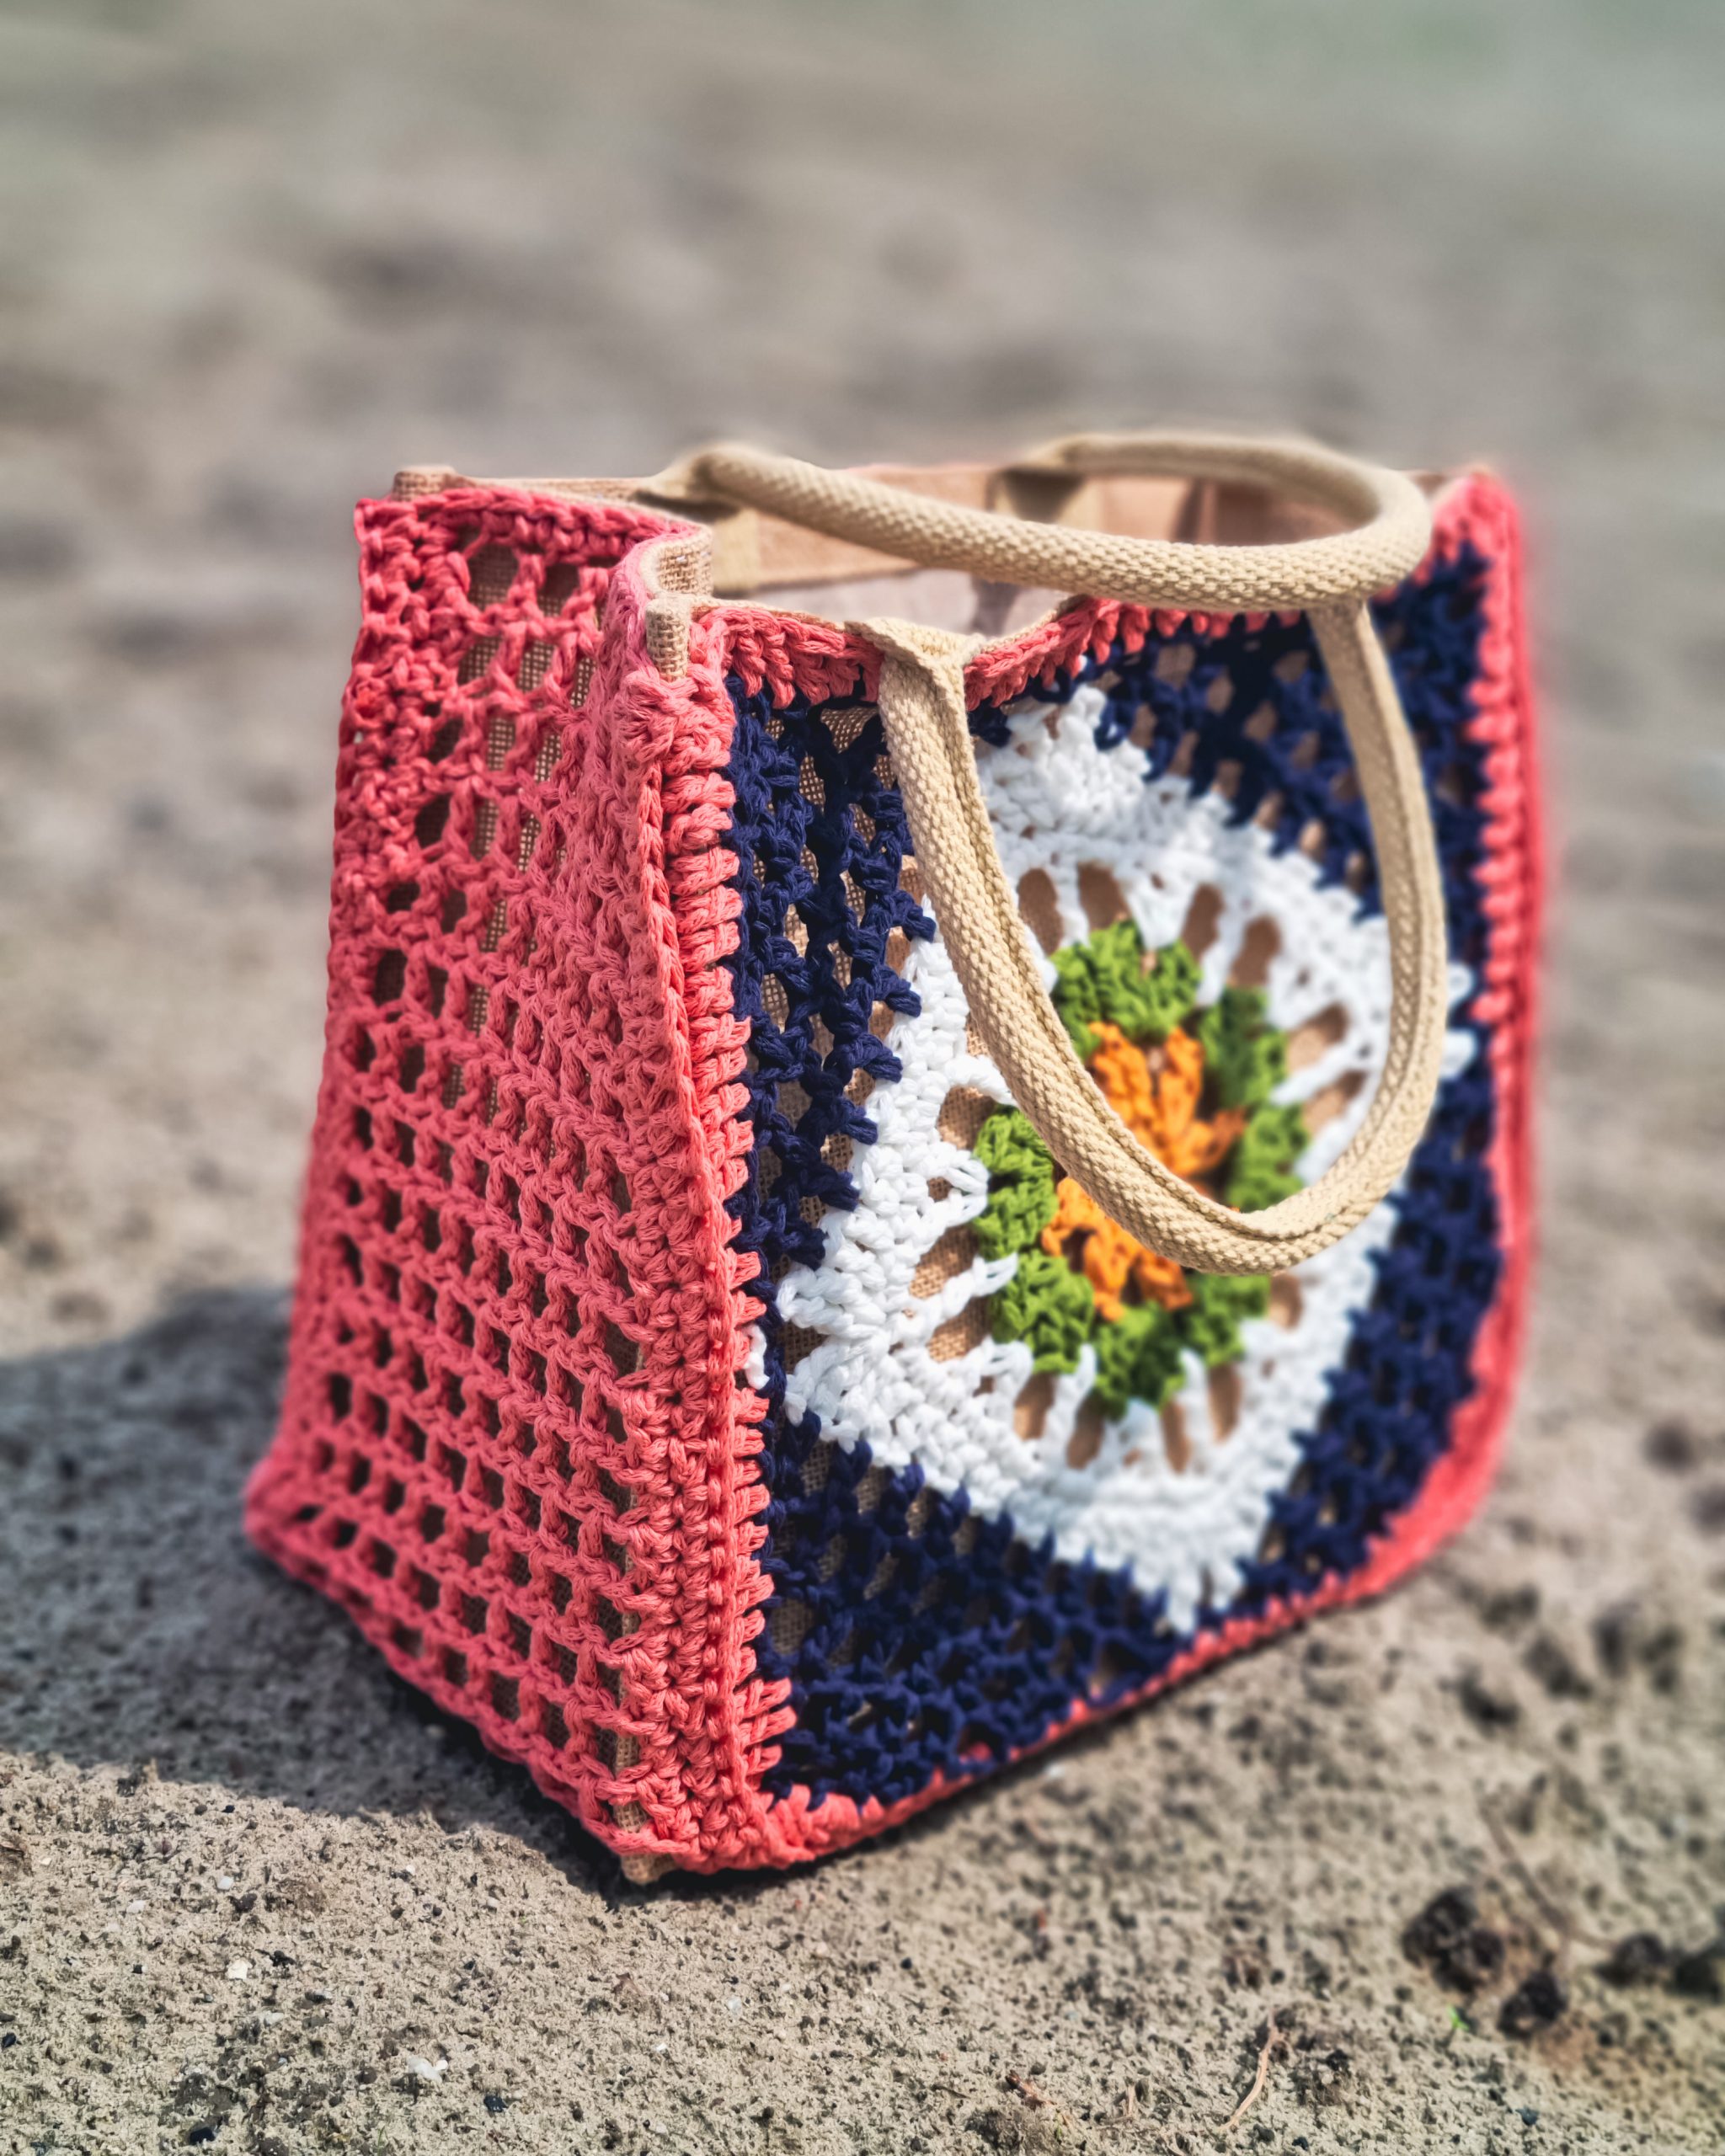 Pattern for this cute bag? : r/crochet